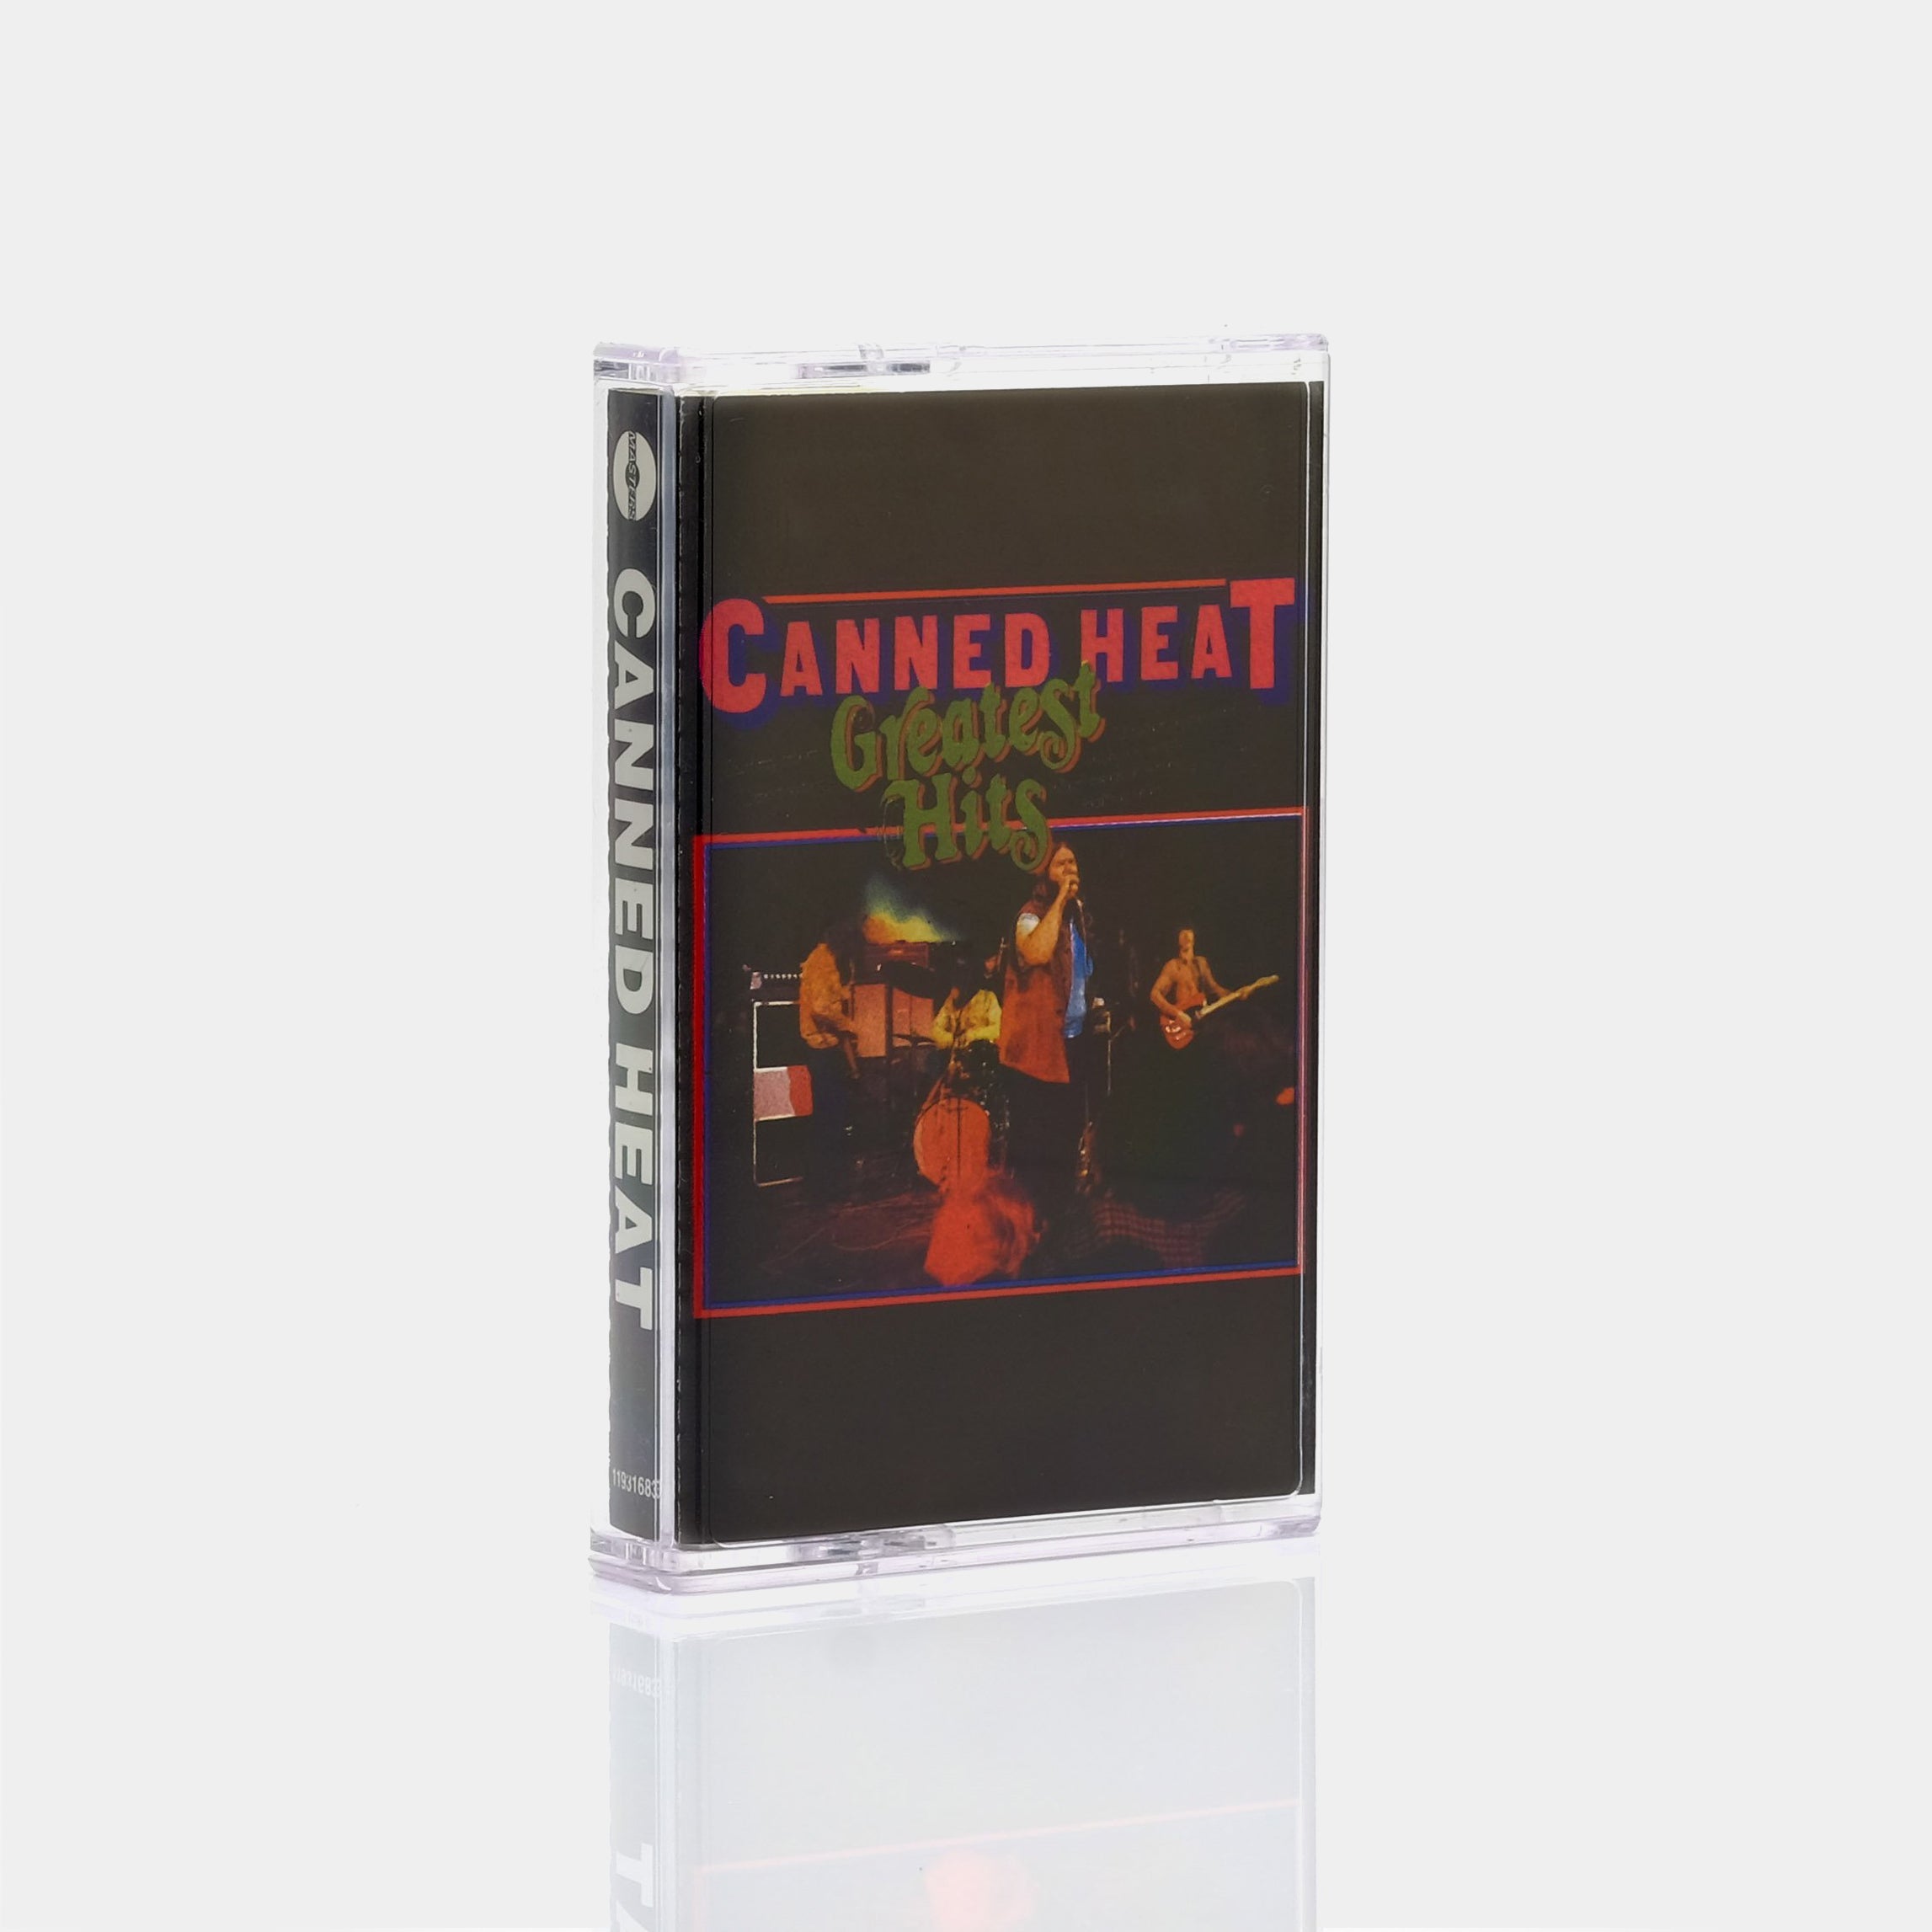 Canned Heat - Greatest Hits Cassette Tape